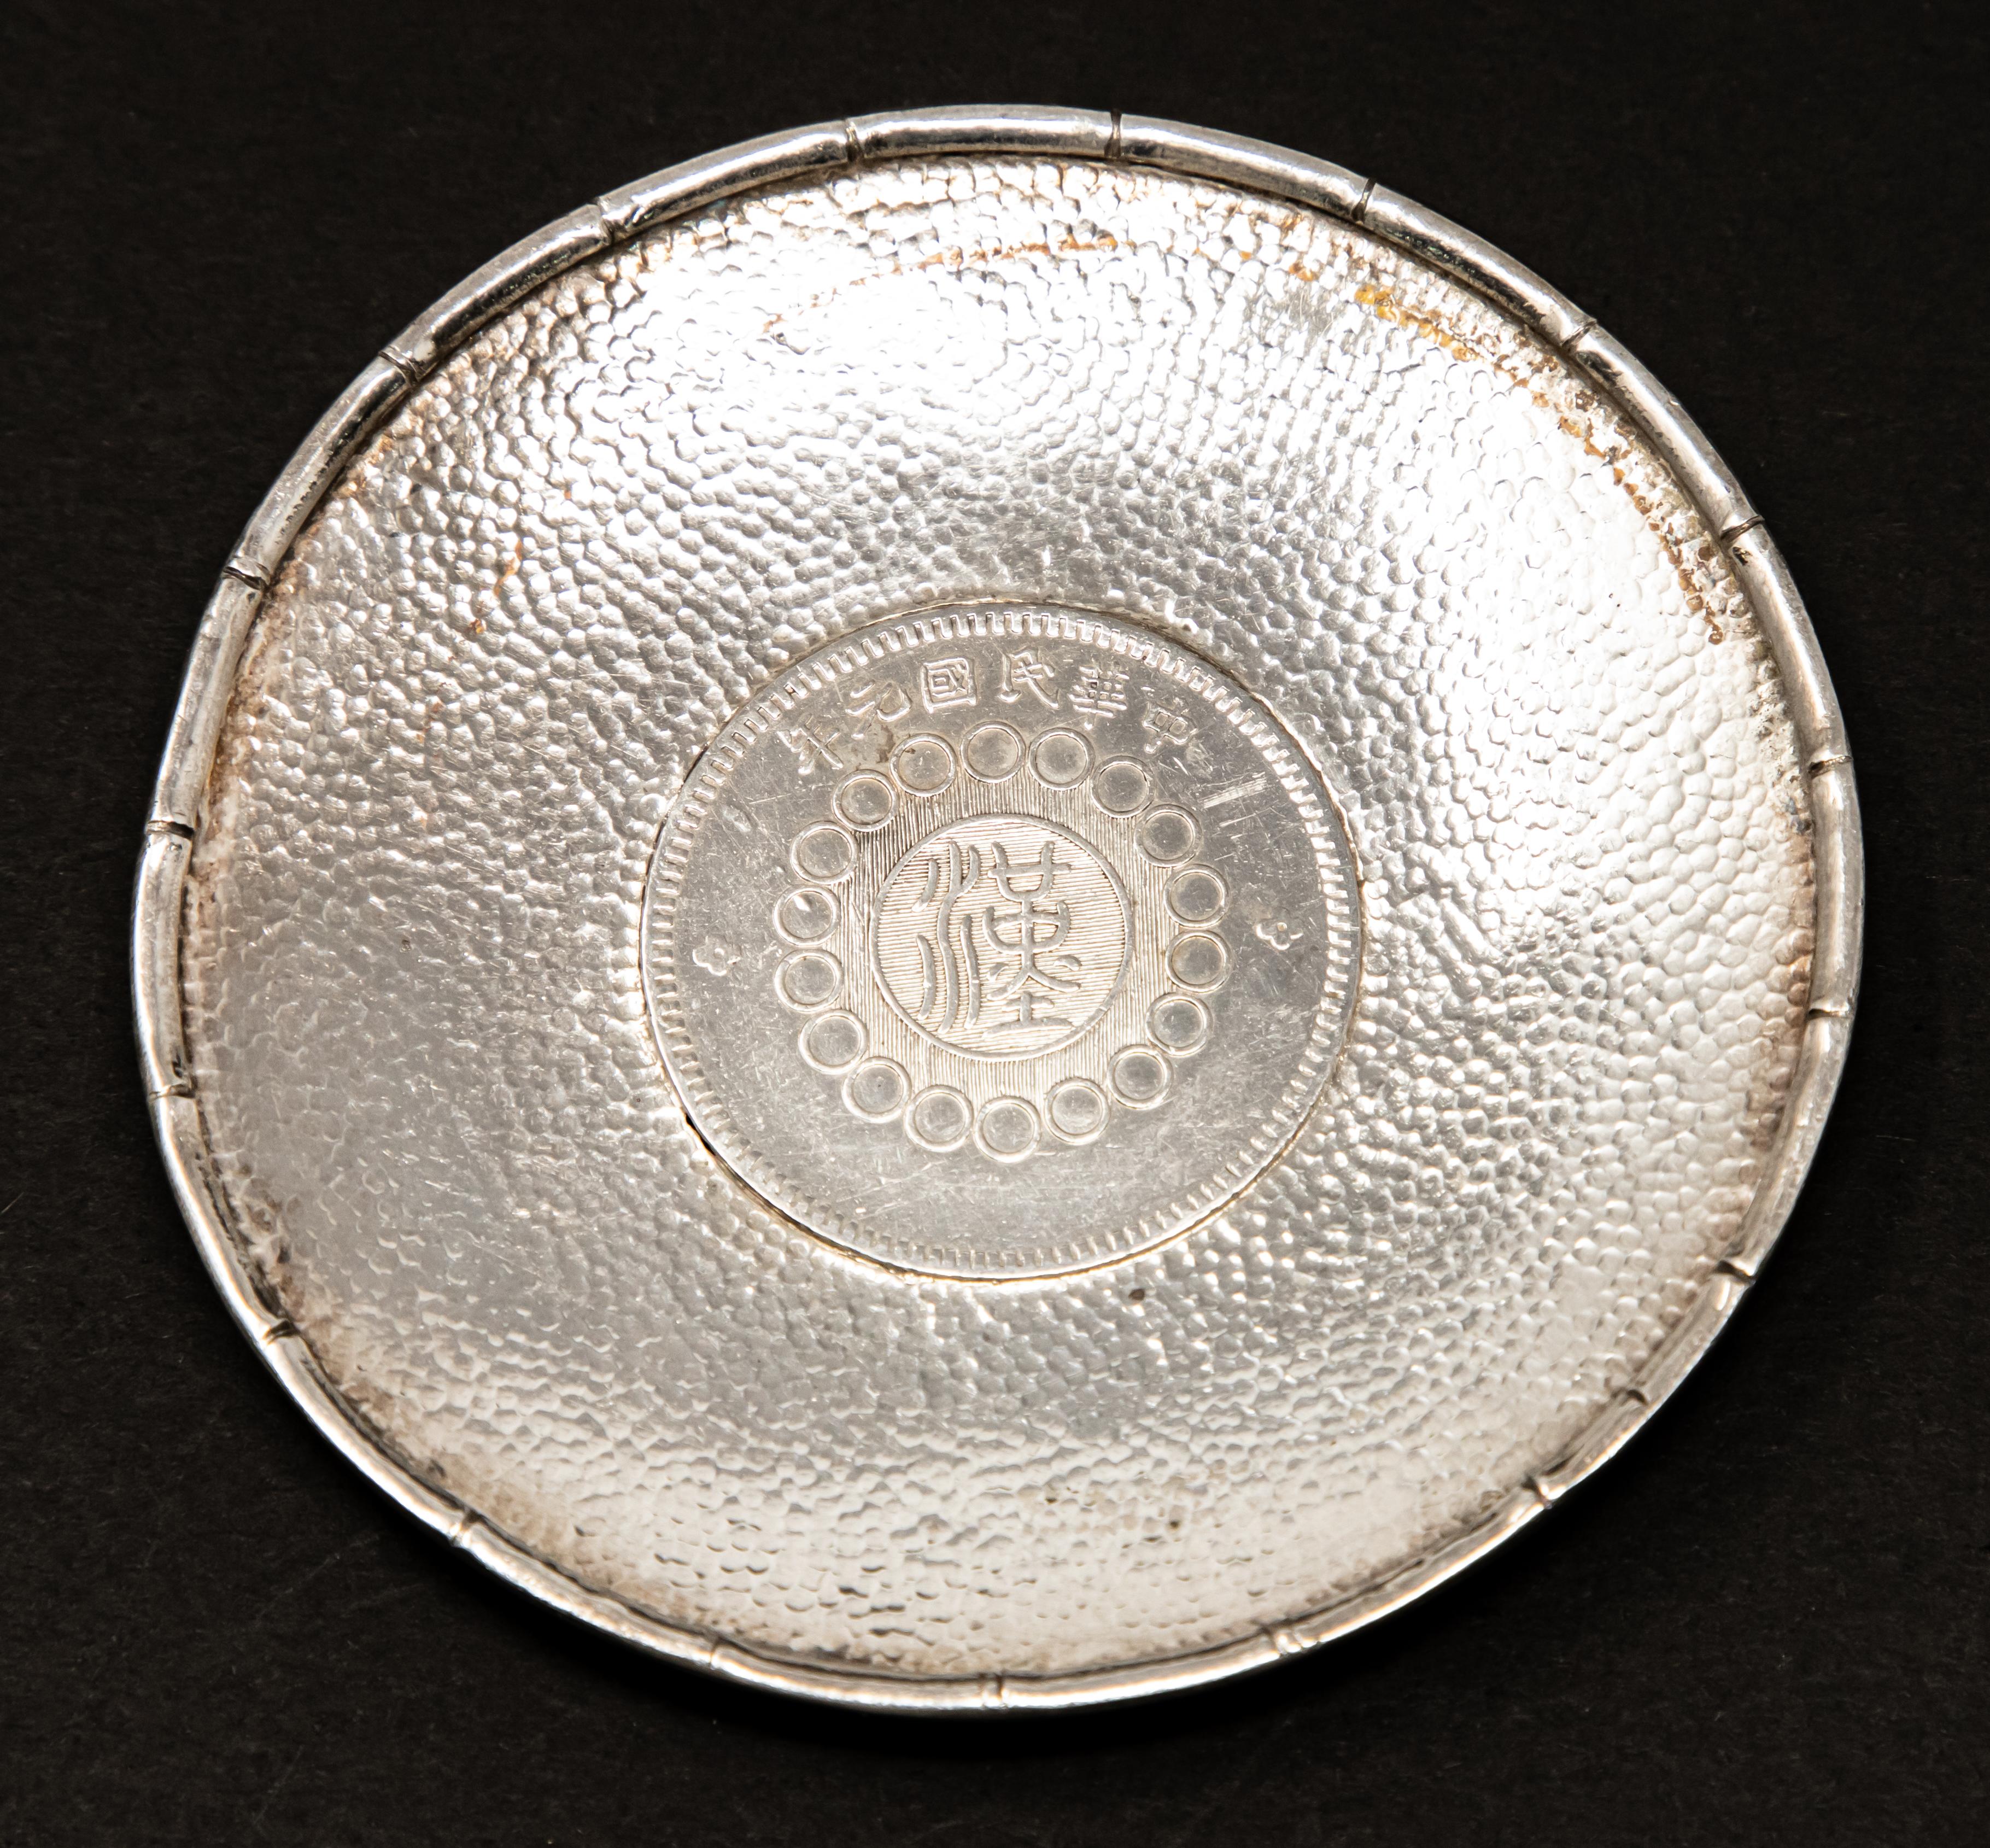 Offering this sterling silver Chinese coin dish. The coin is marked on both sides with Chinese markings.